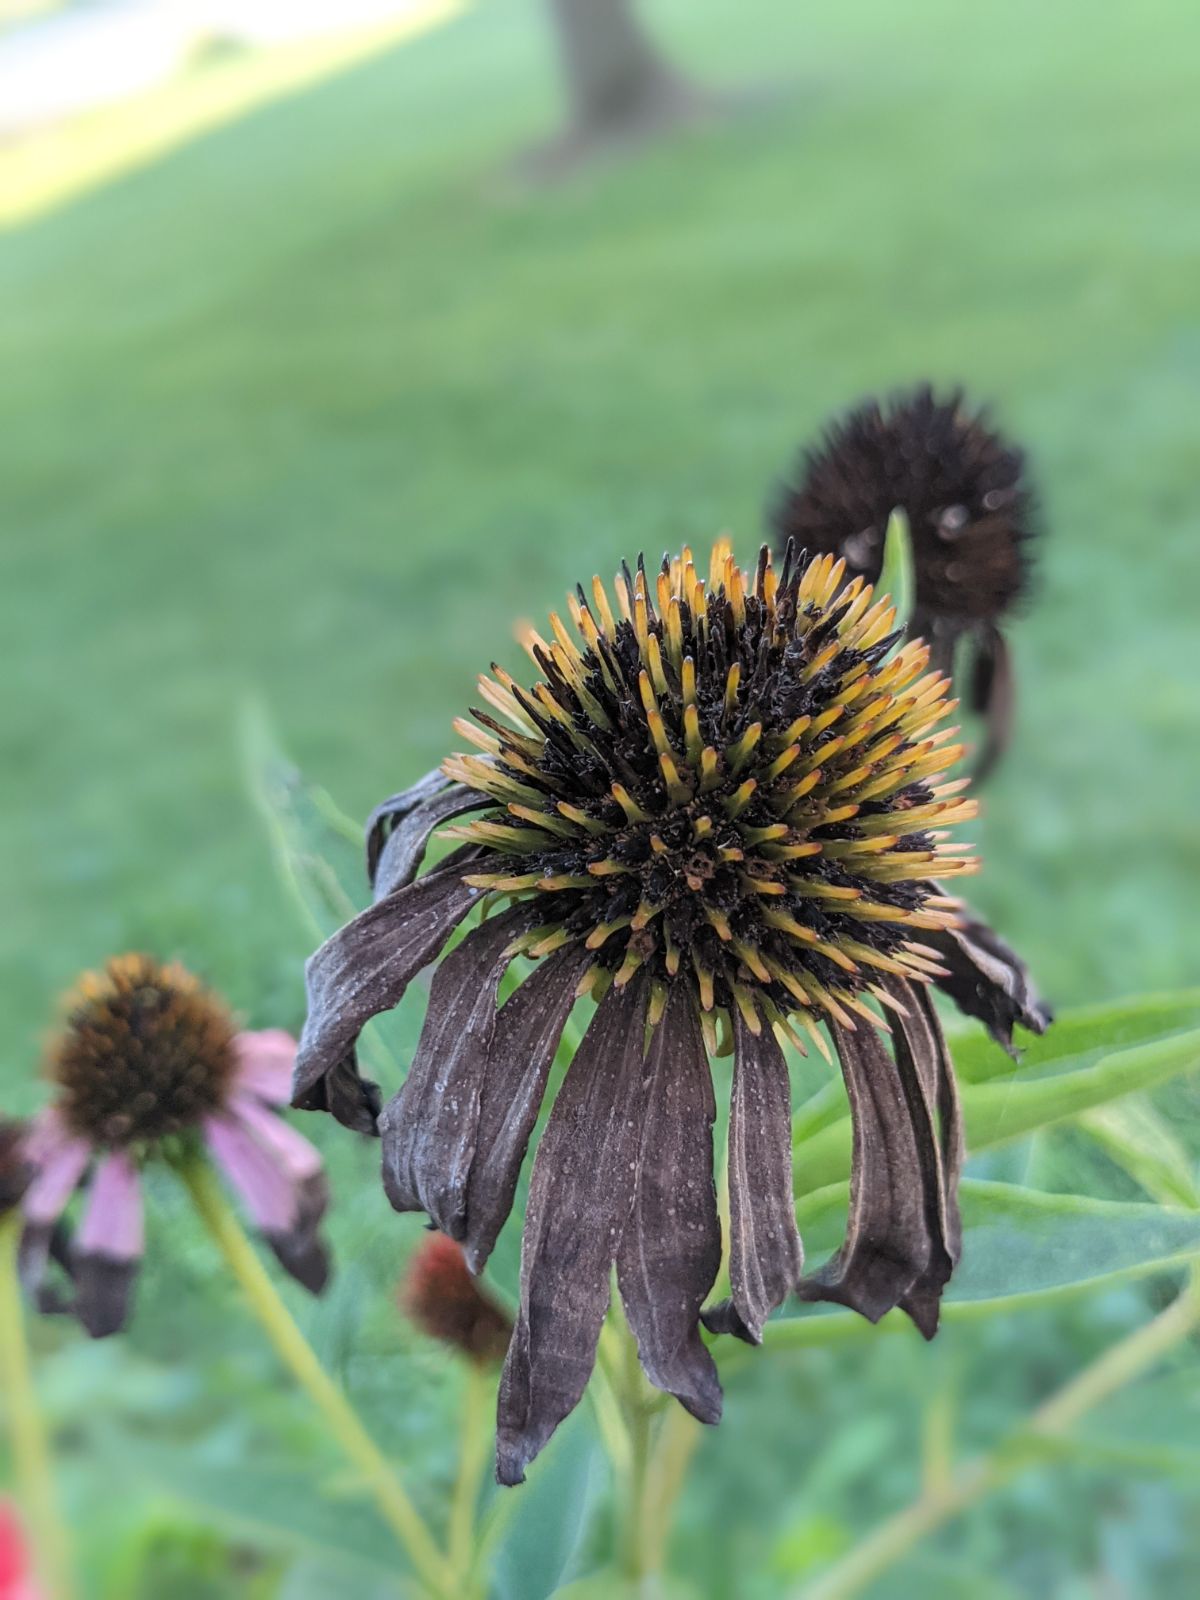 Coneflower deadhead needs to be removed from echinacea plant